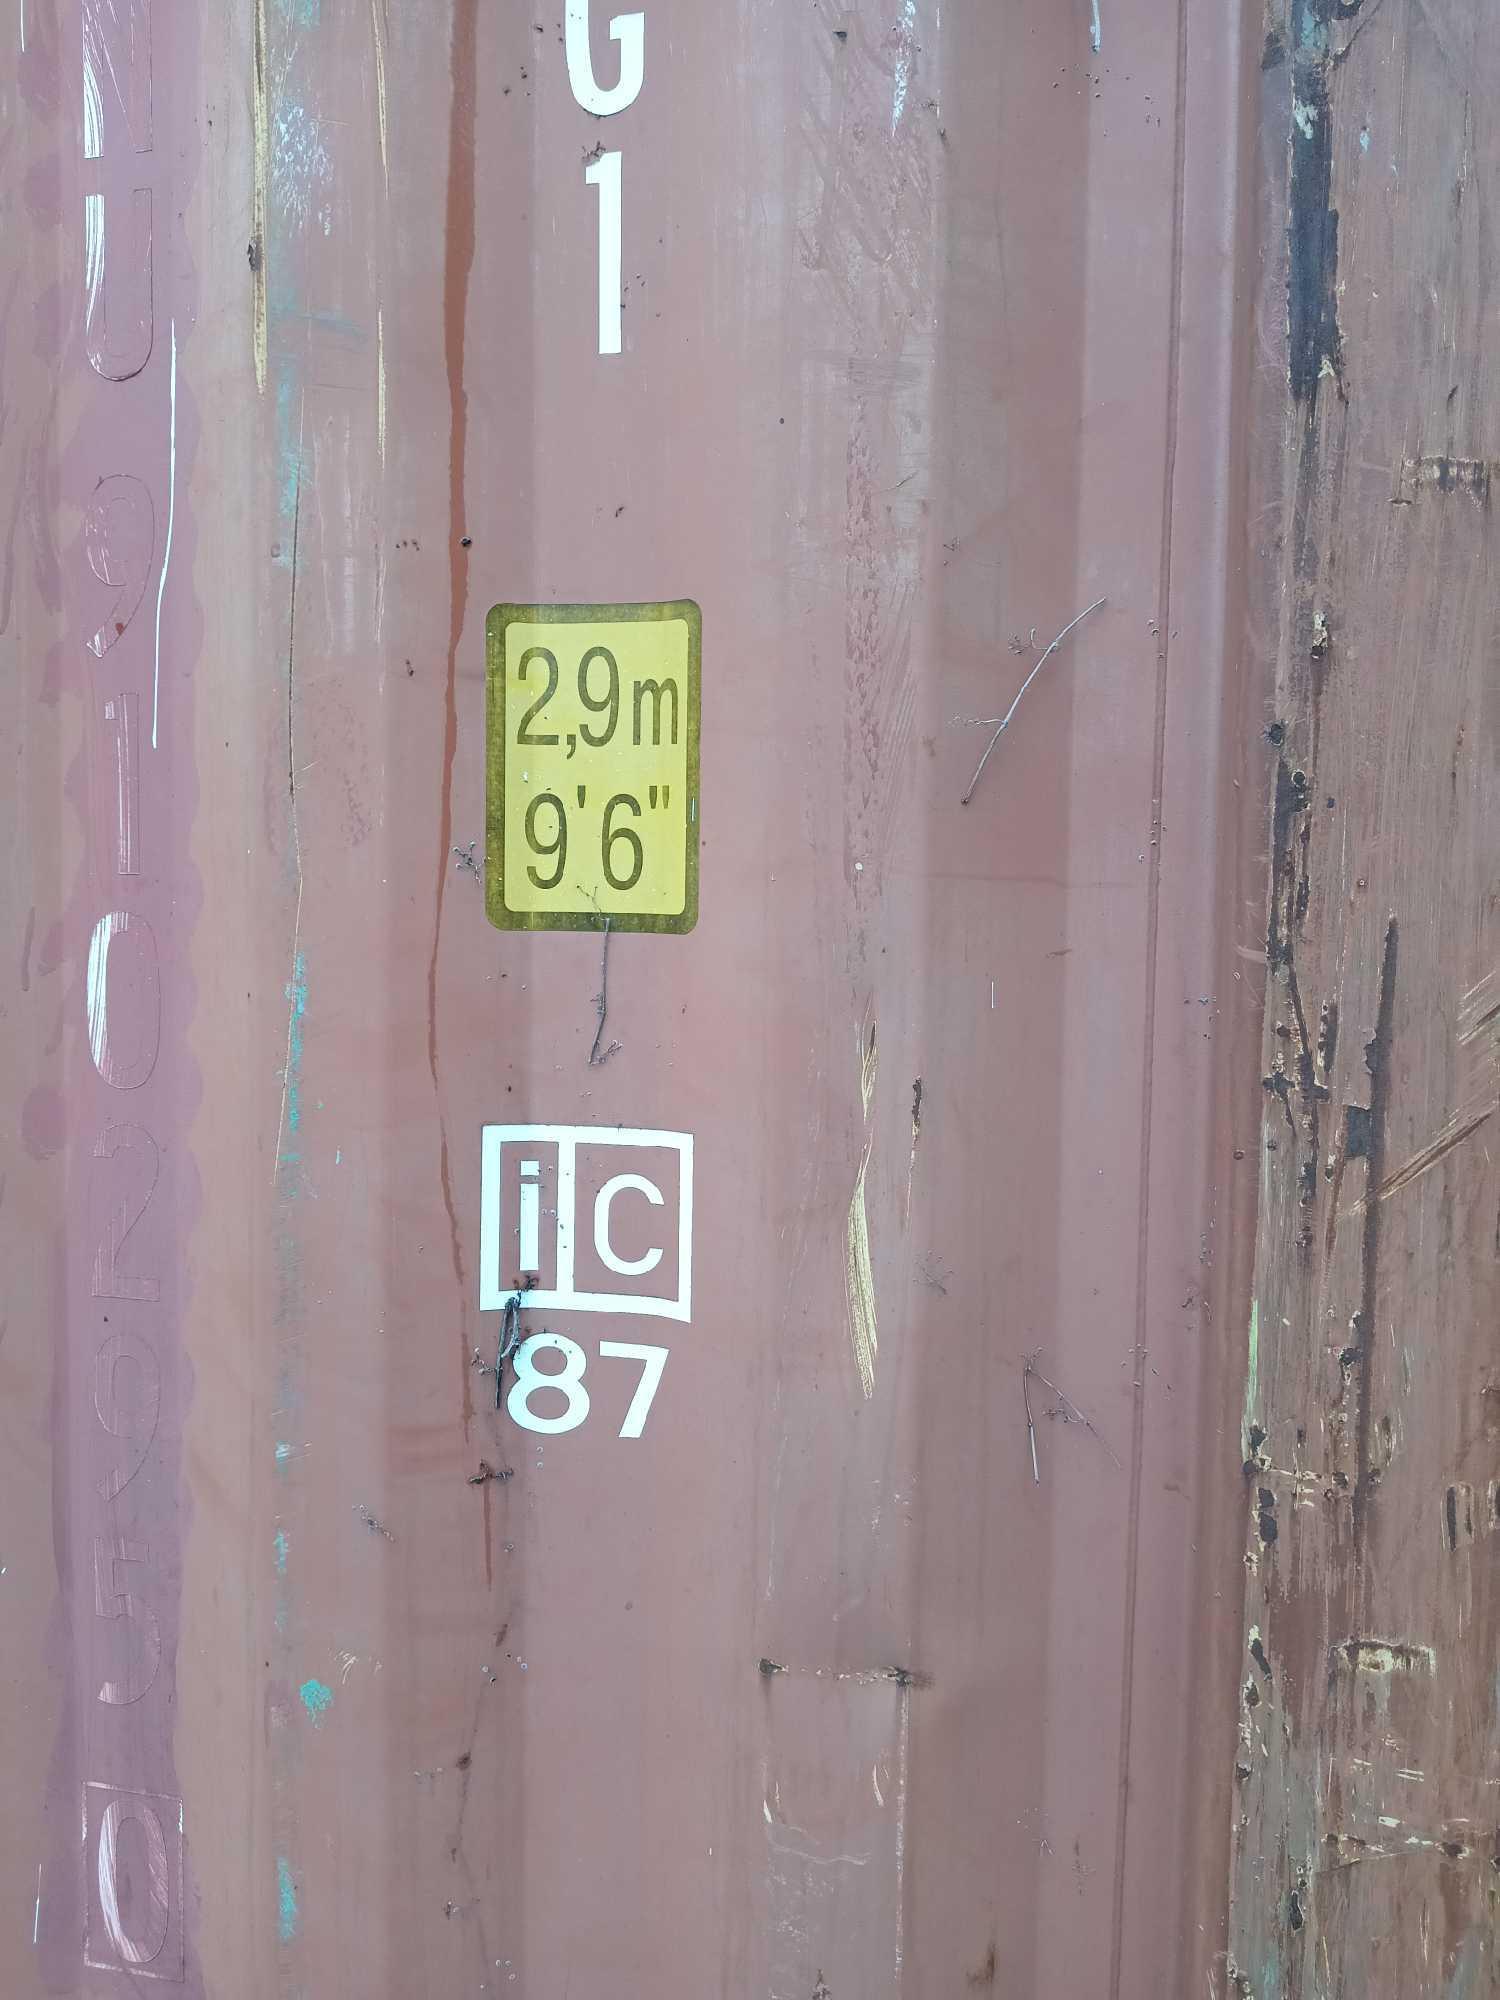 40 ft Shipping container